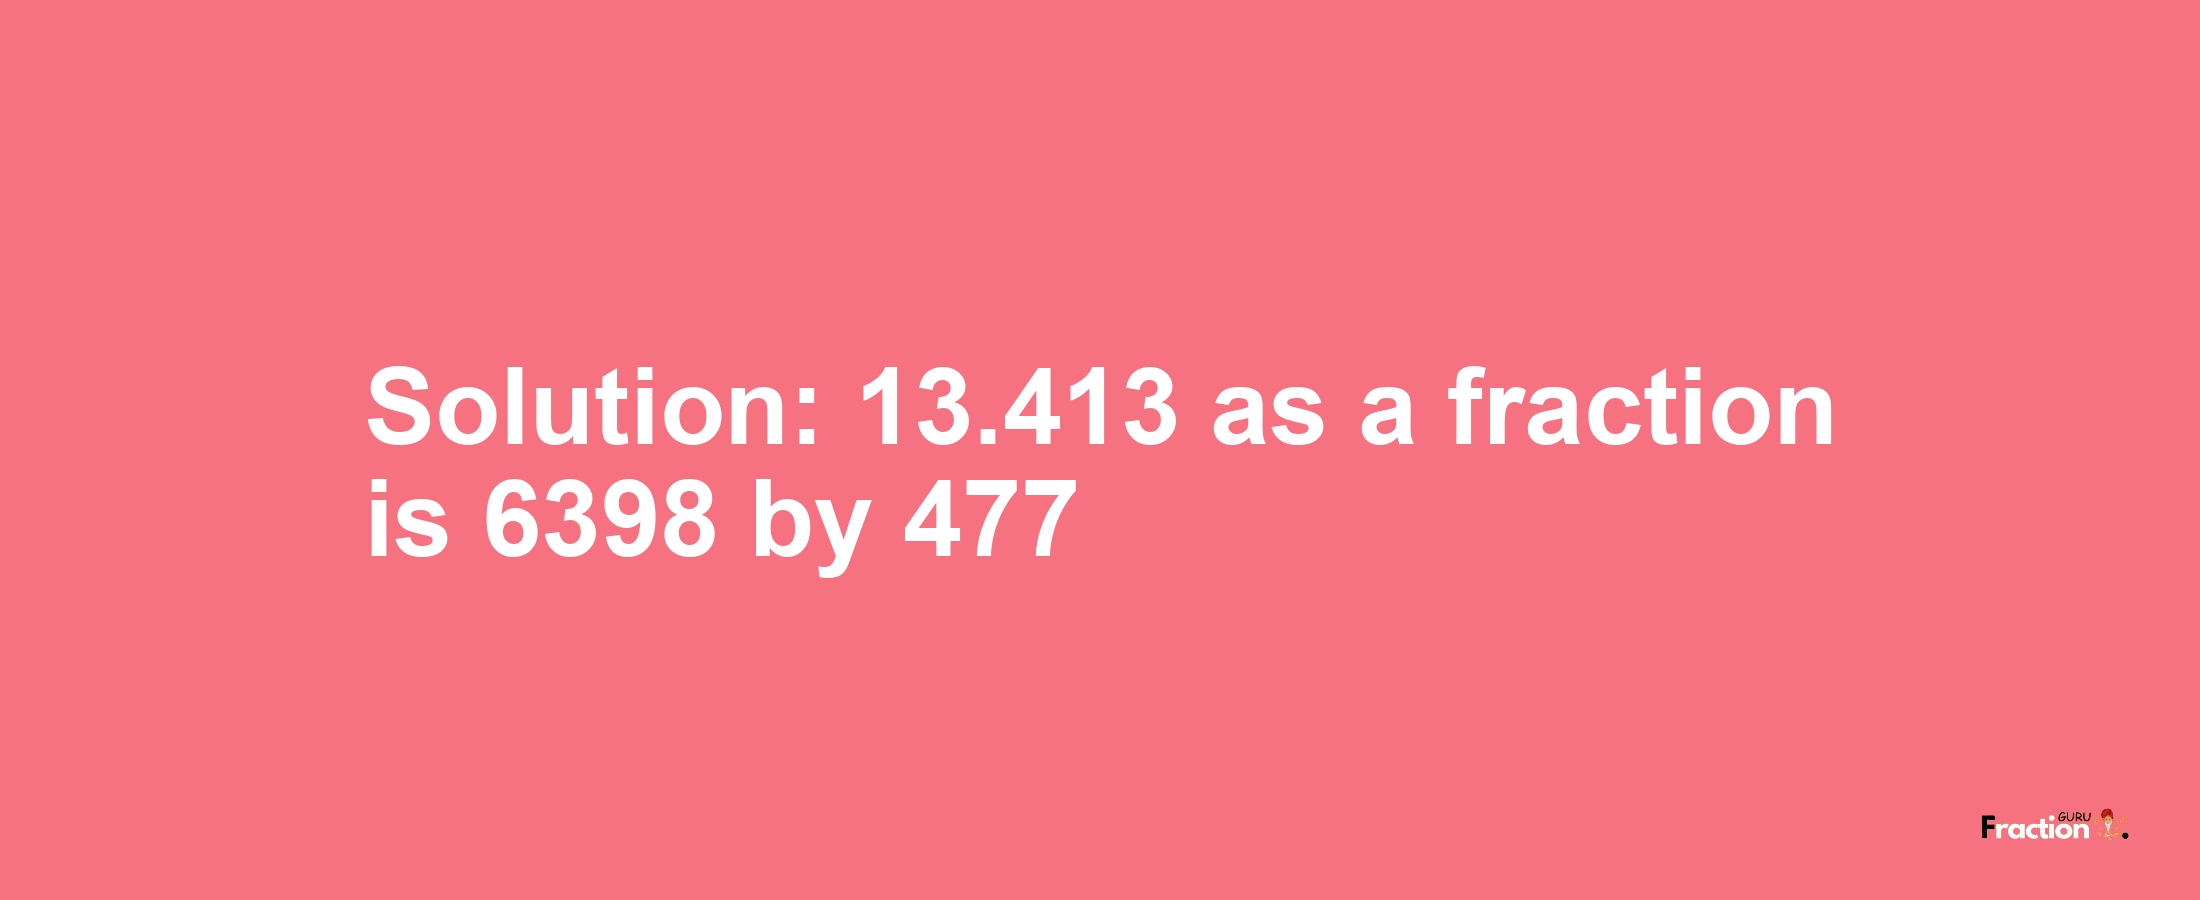 Solution:13.413 as a fraction is 6398/477